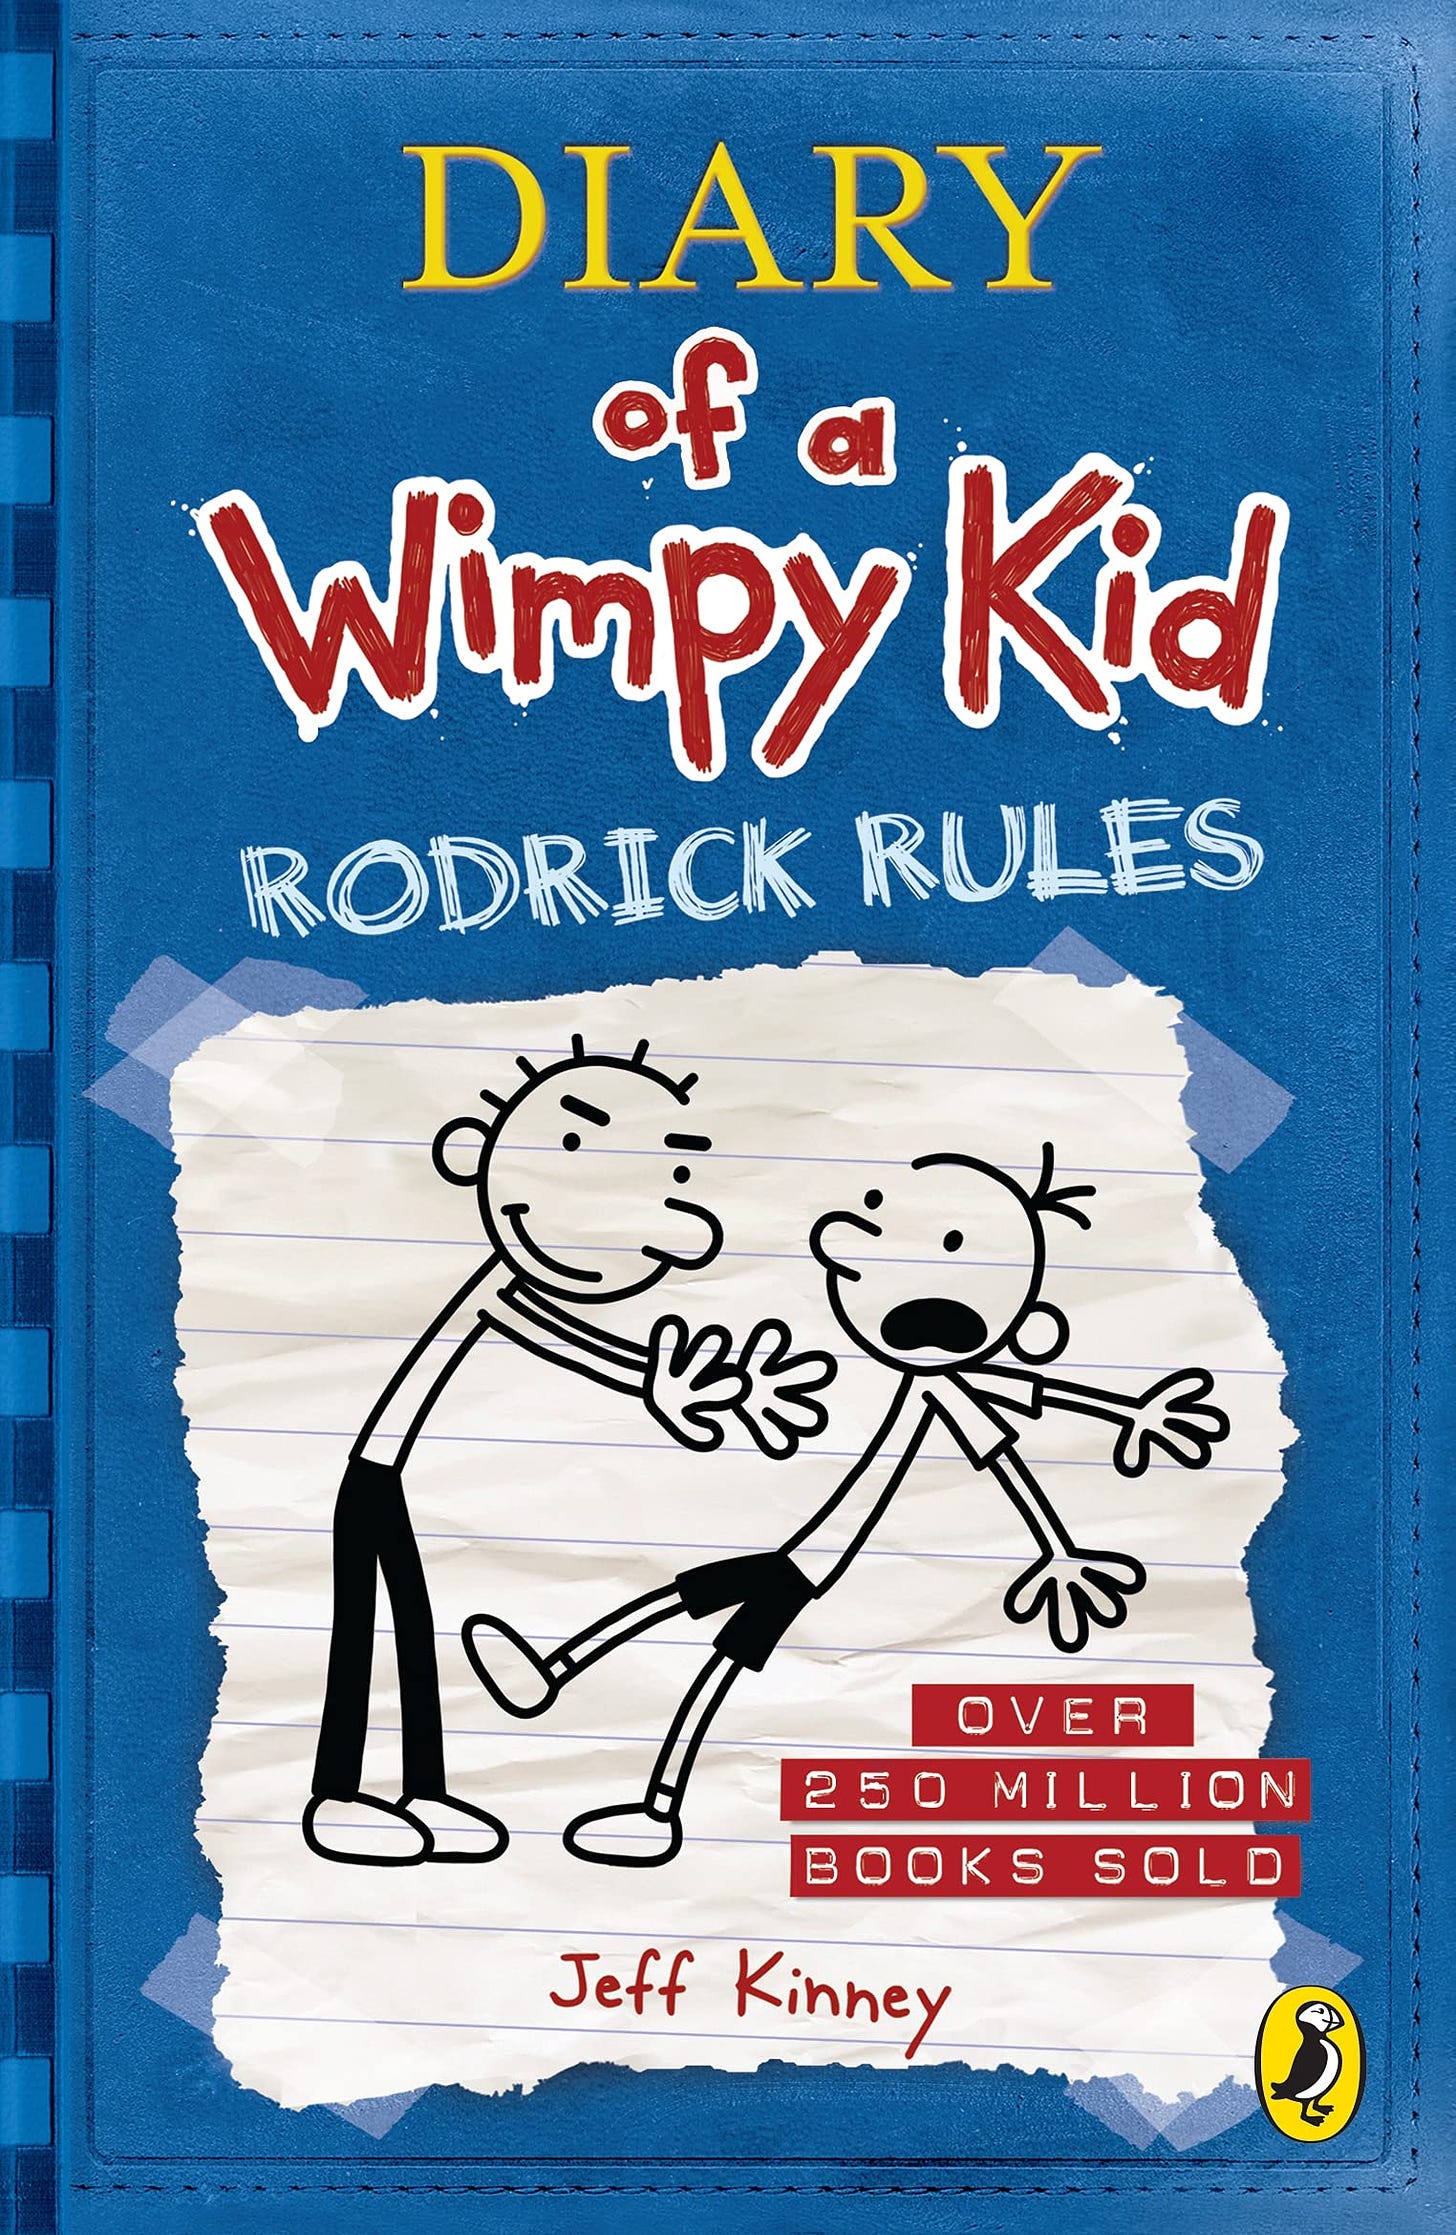 Diary of a Wimpy Kid: Rodrick Rules (Book 2) : Jeff Kinney: Amazon.in: Books